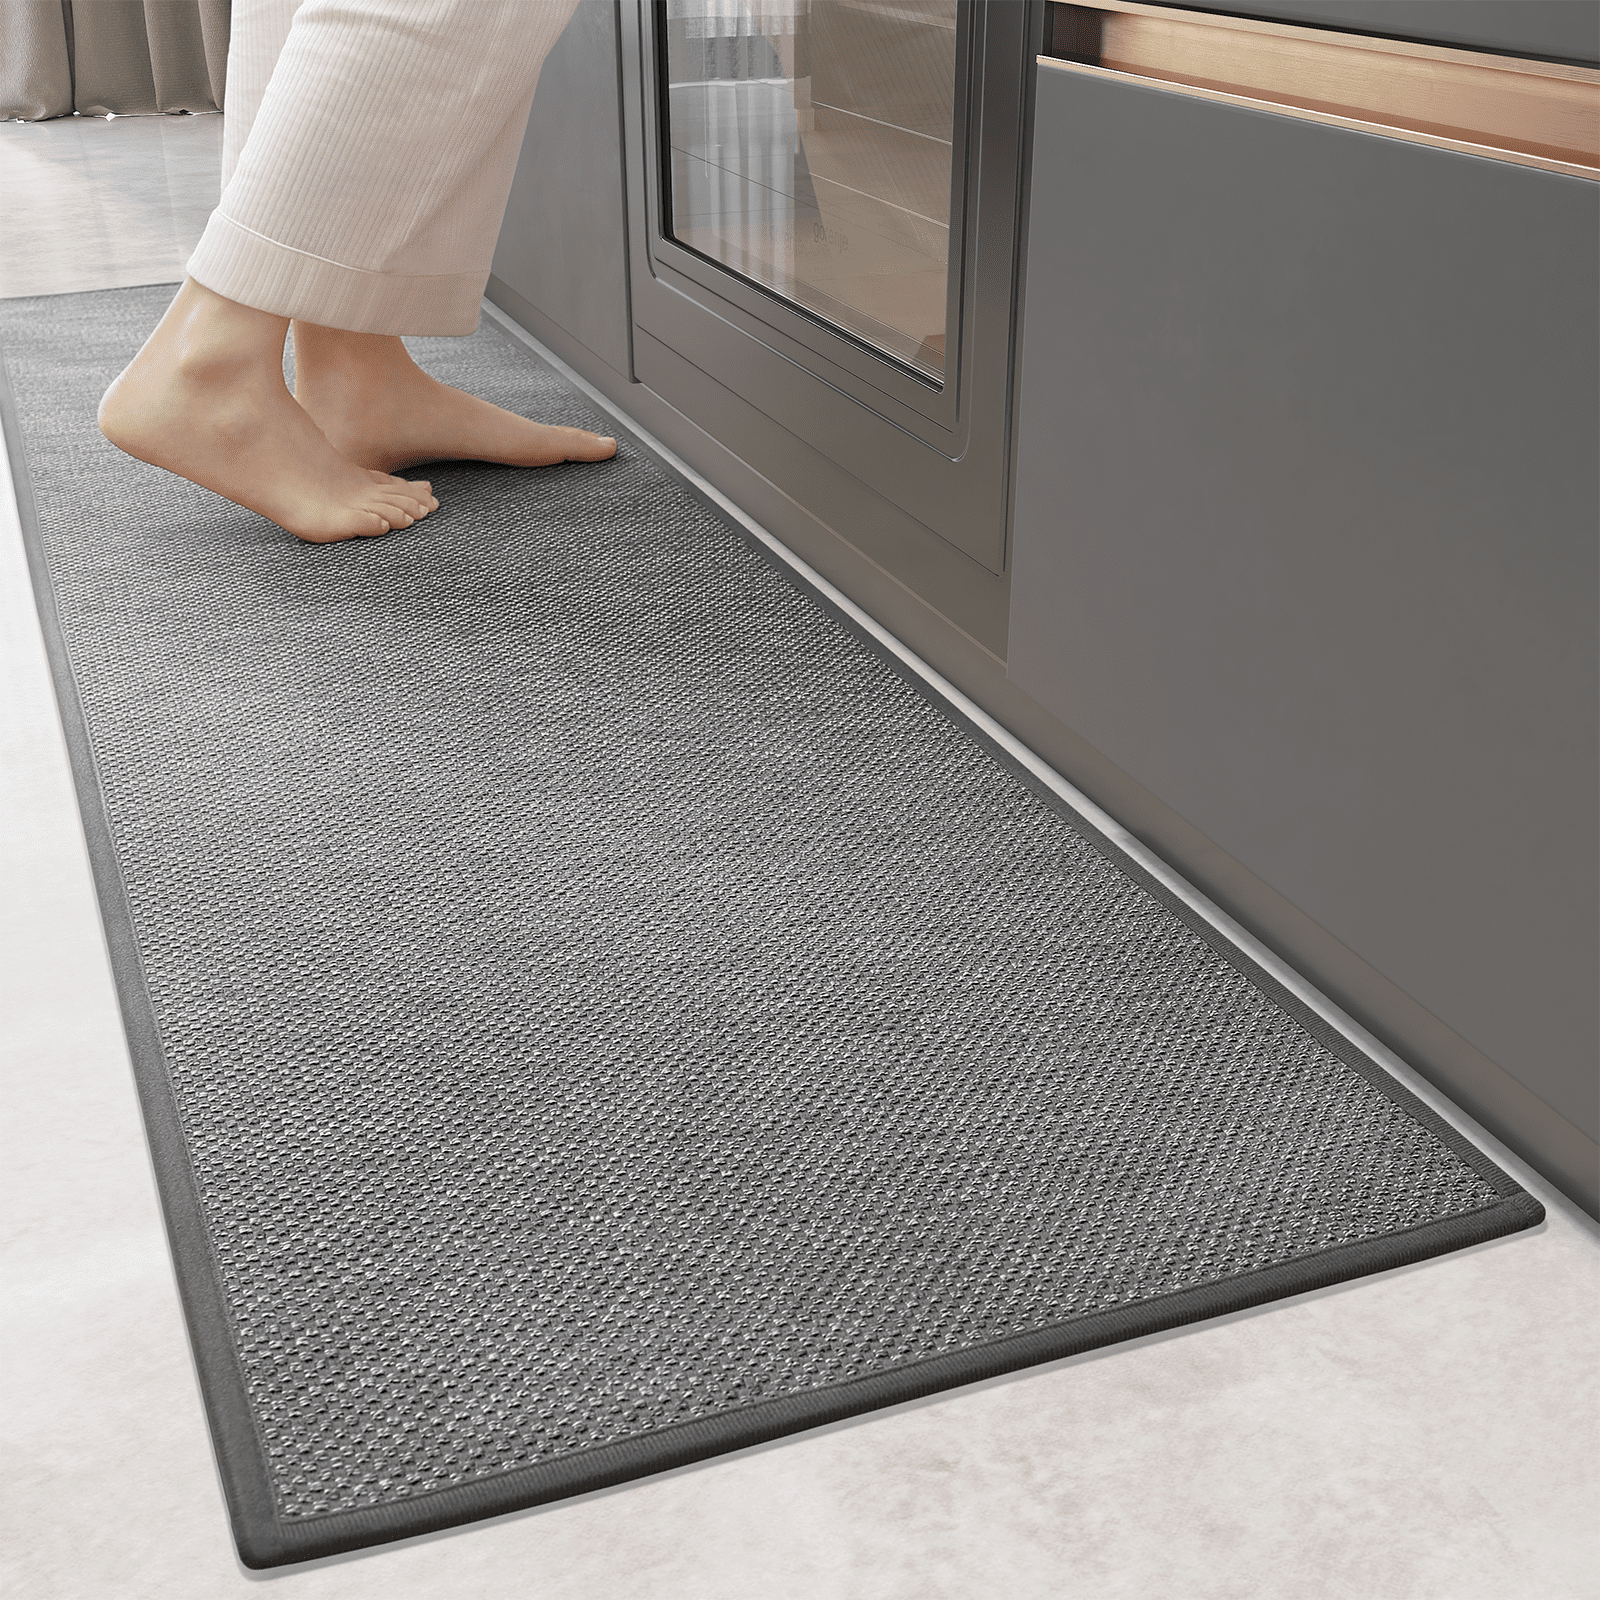  Hargiis Kitchen Mat 2PCS, Rubber Non-Skid Kitchen Rugs  Washable, Absorbent Runner Mat for Floor, Machine Washable Mats for in  Front of Sink, Door, Laundry, Entrance, Home (Flaxen, 47×17+32×17) :  Home 